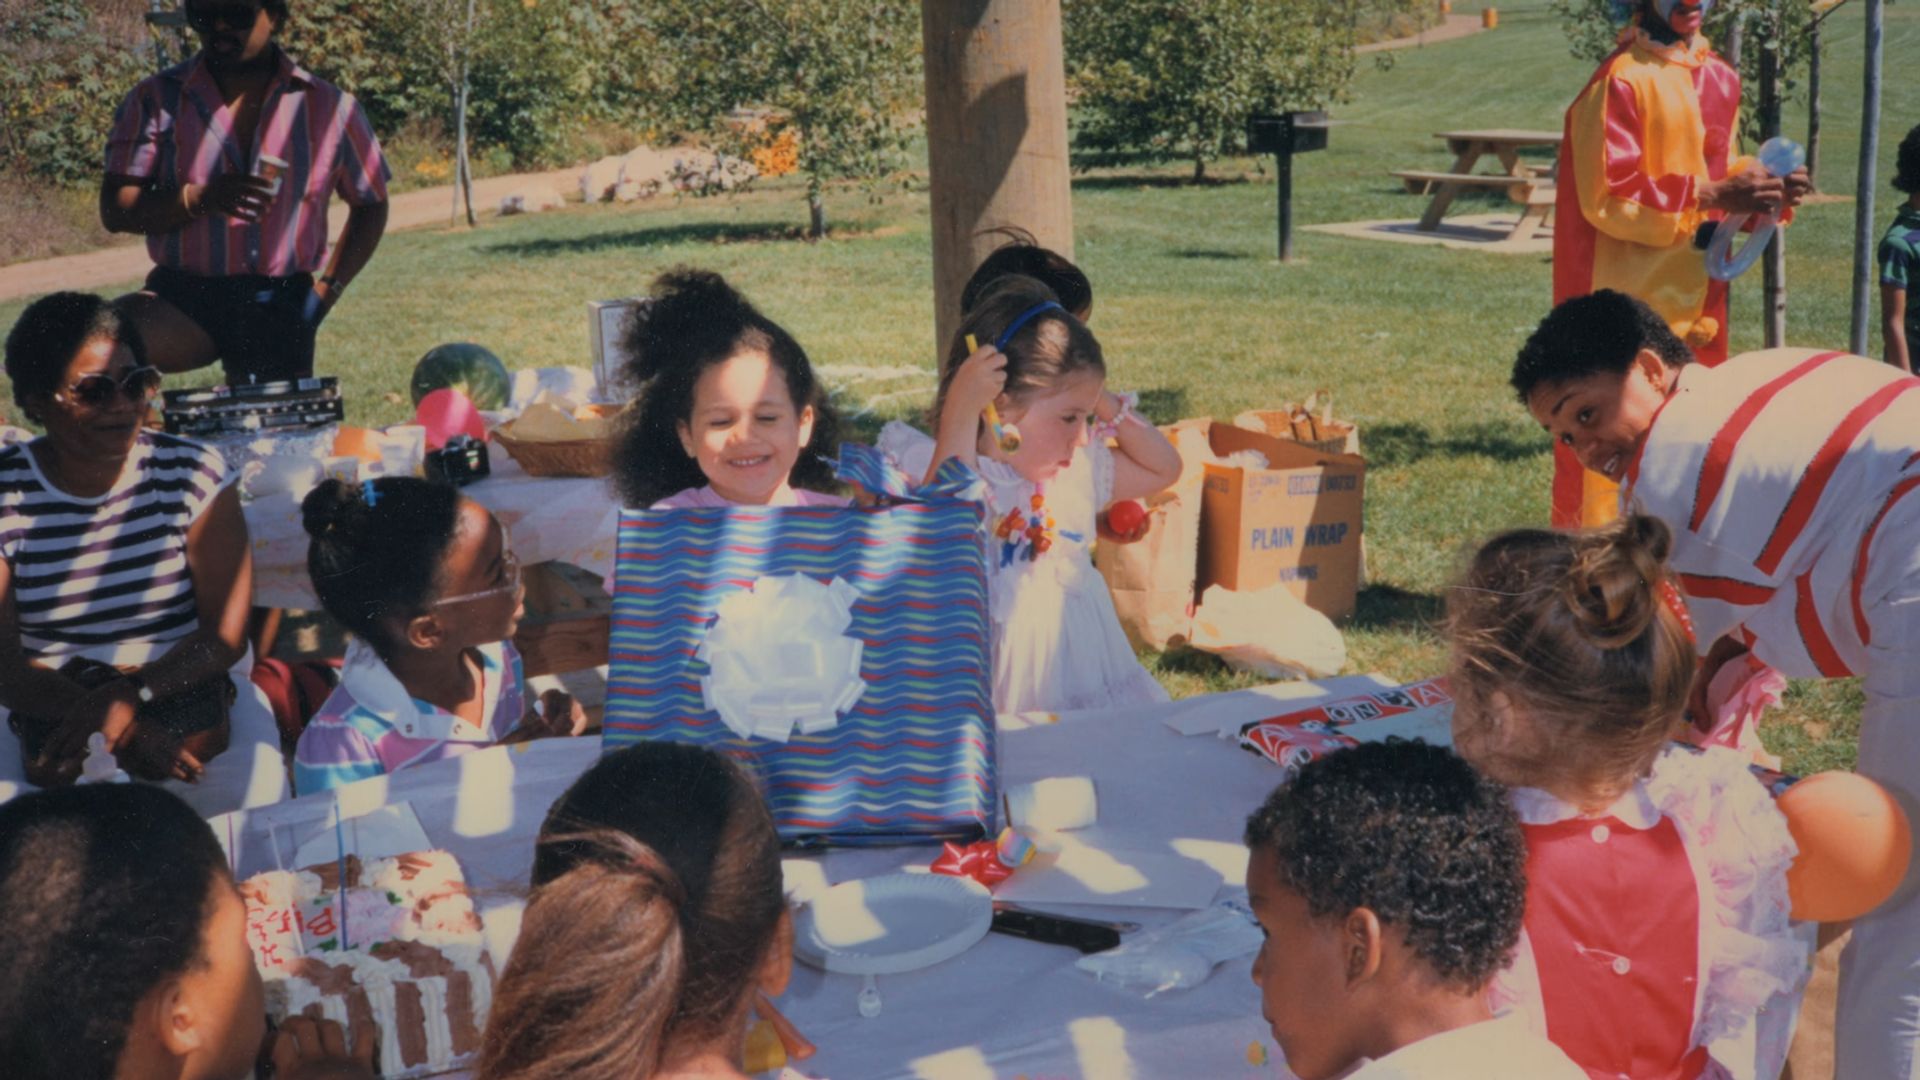 A young Meghan Markle at a birthday party holding a blue present